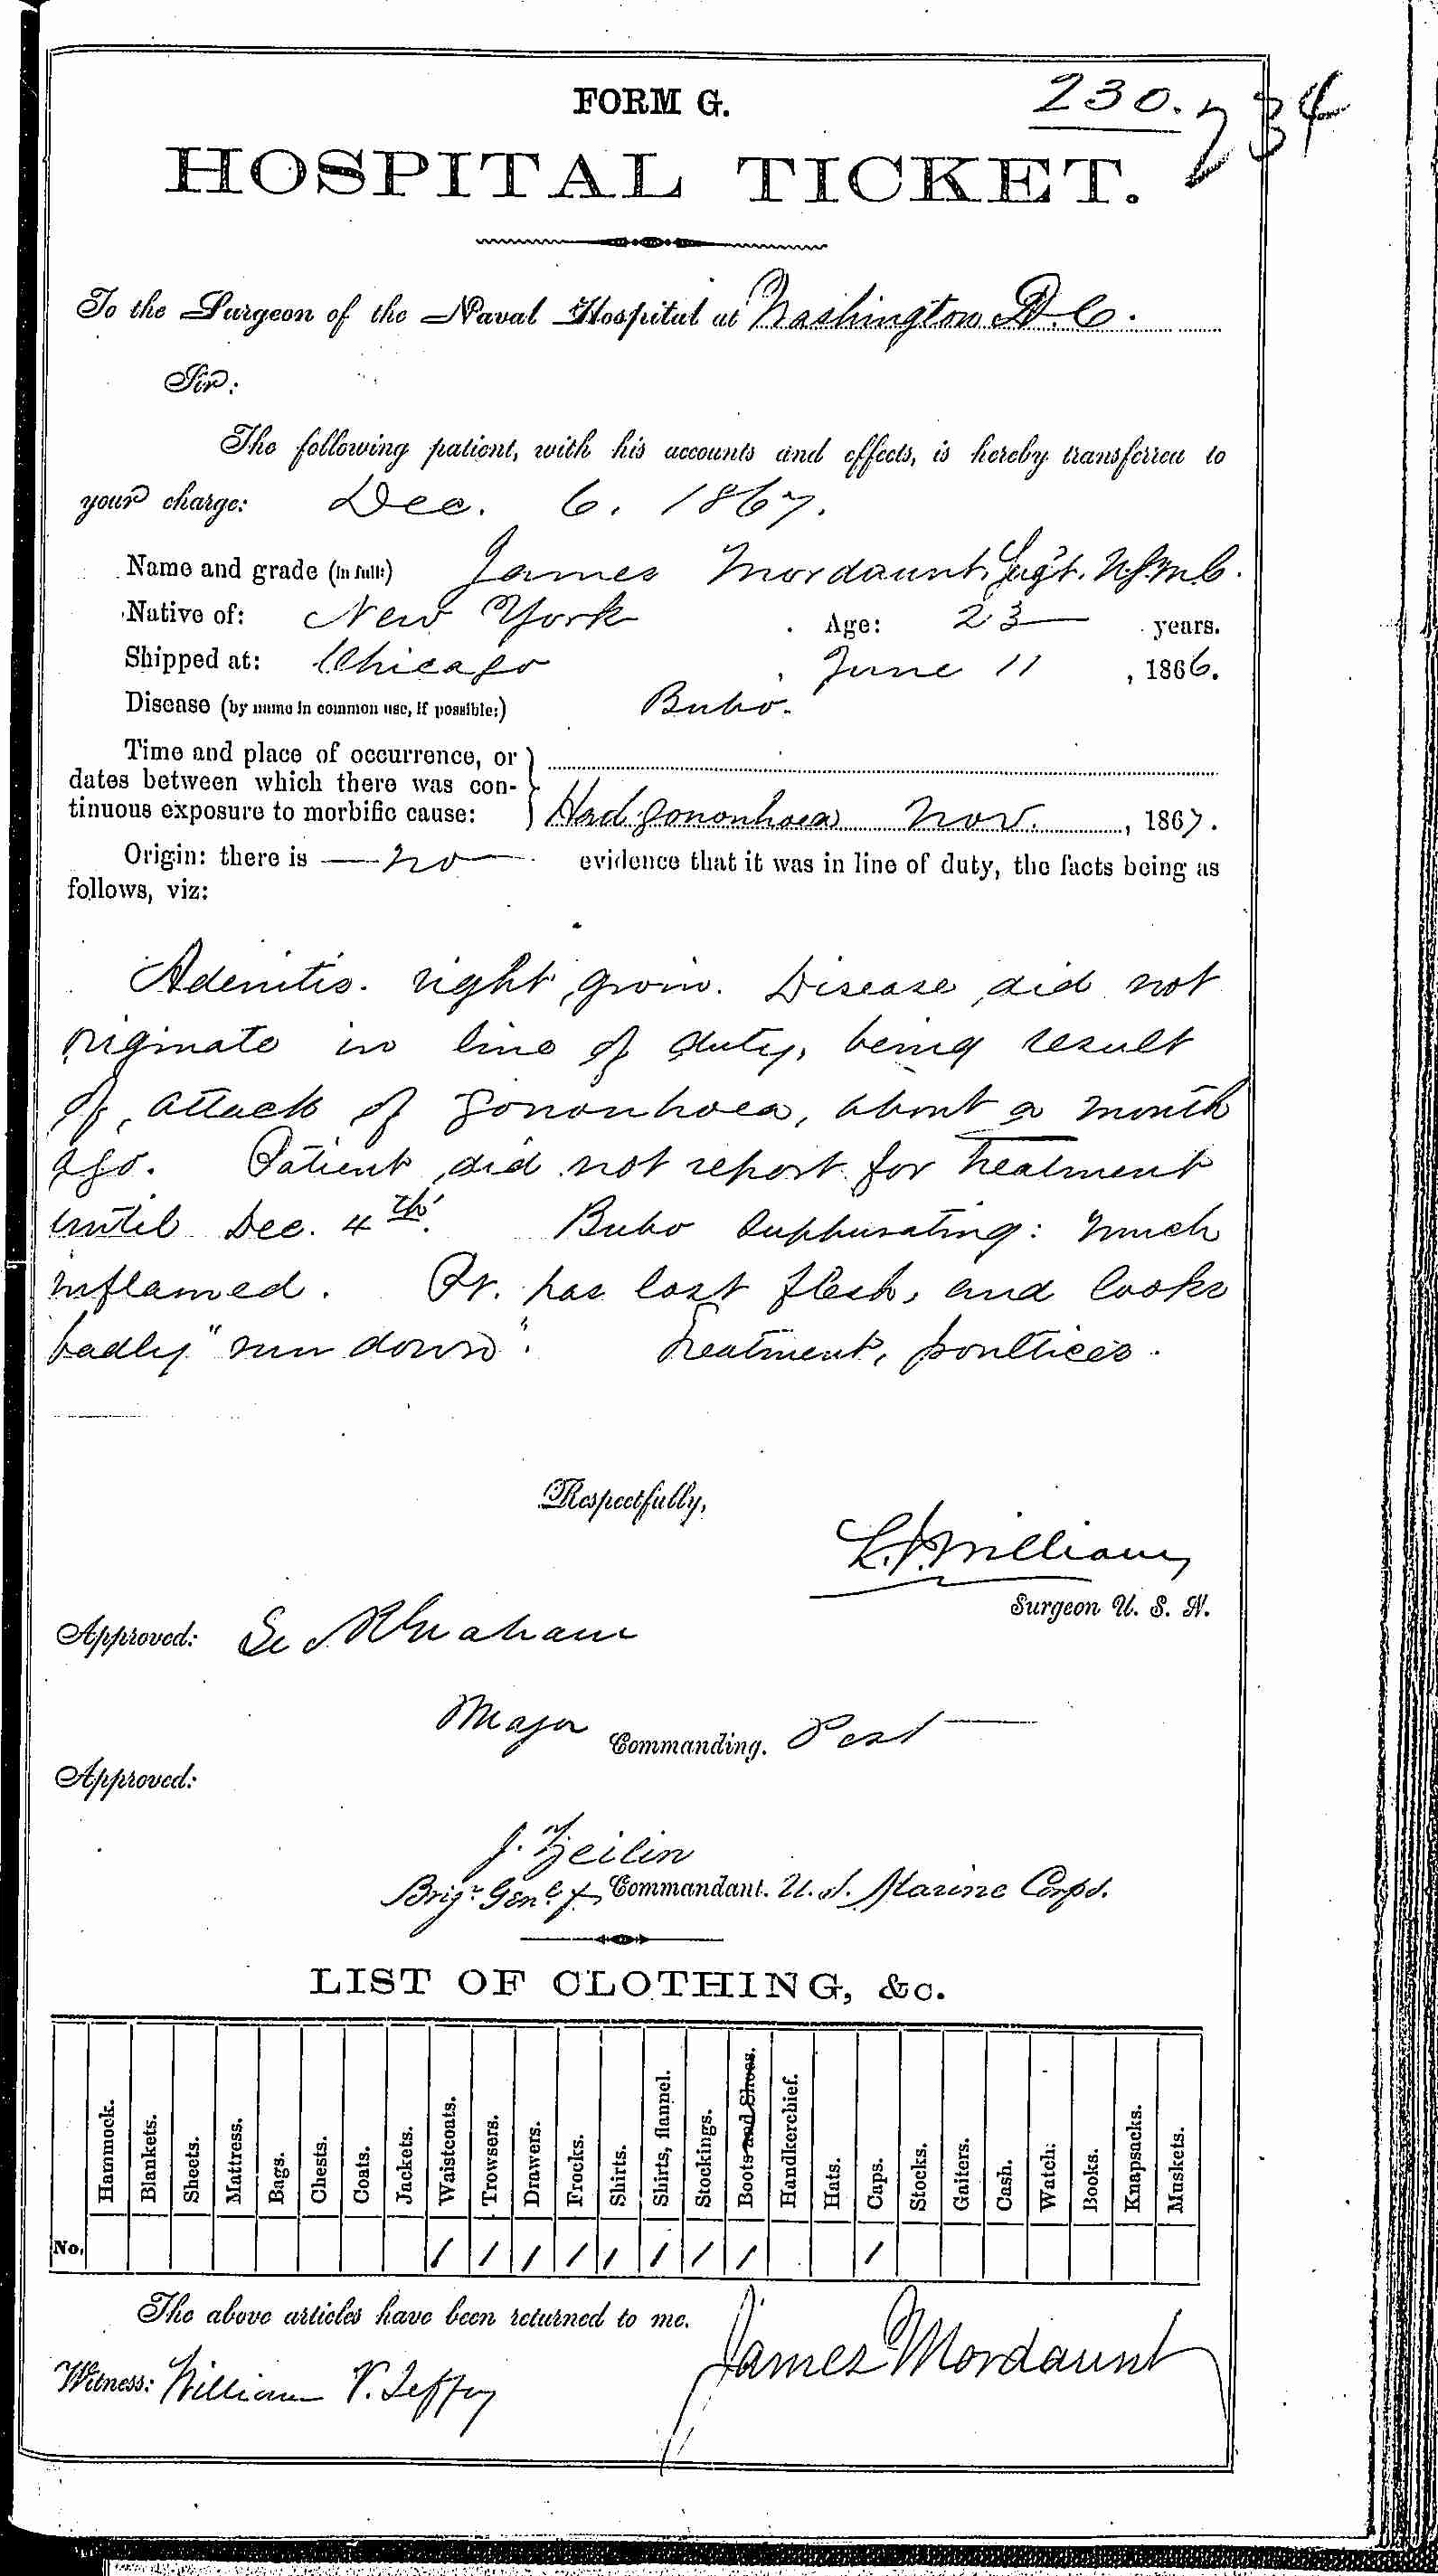 Entry for James Mordaunt (second admission page 1 of 2) in the log Hospital Tickets and Case Papers - Naval Hospital - Washington, D.C. - 1866-68